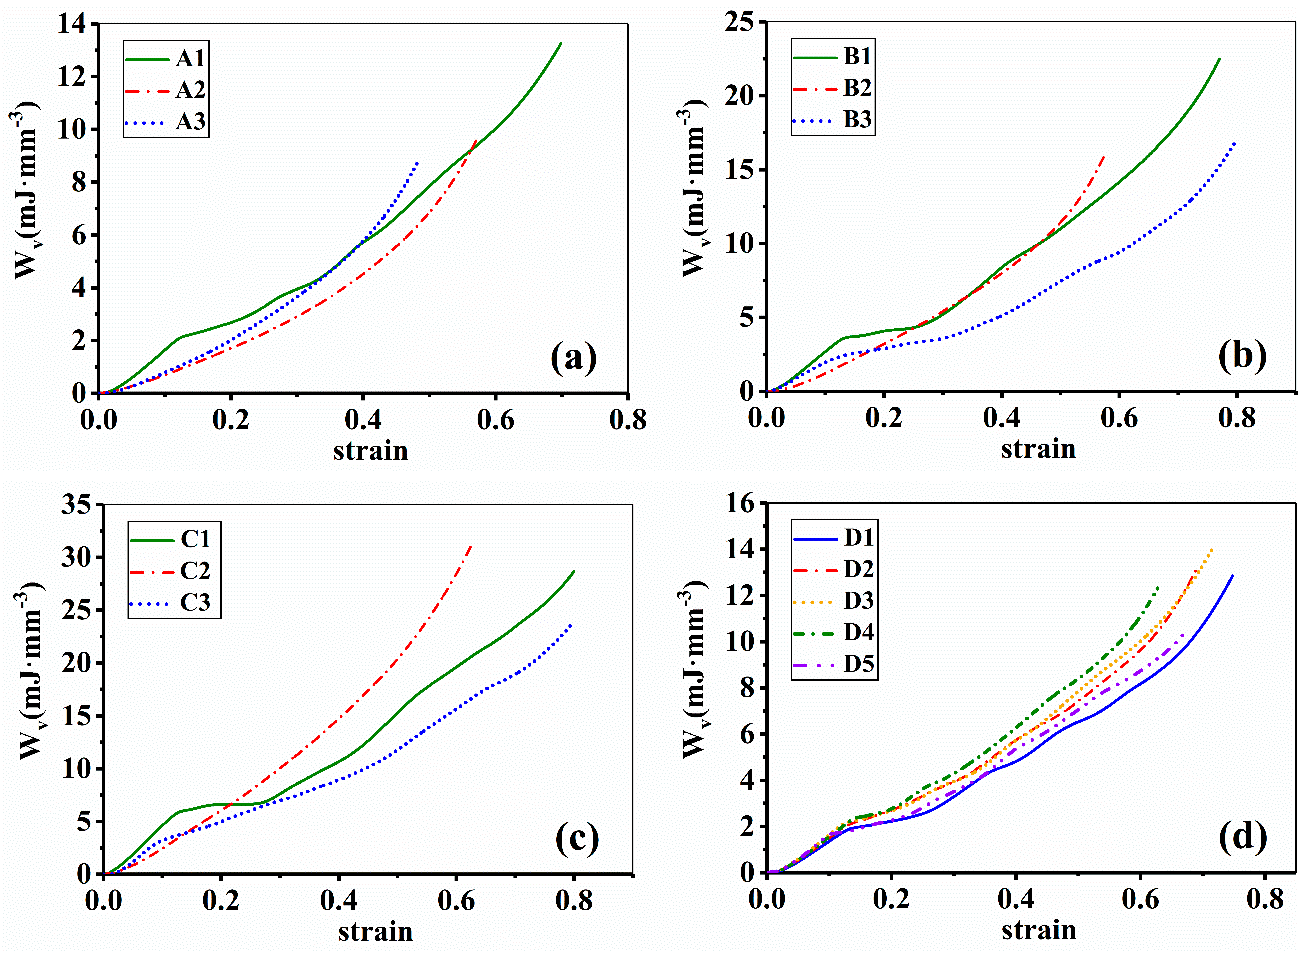 Absorbed energy per unit volume of EP lattice structure samples; (a–d) represents Group A–D, respectively.